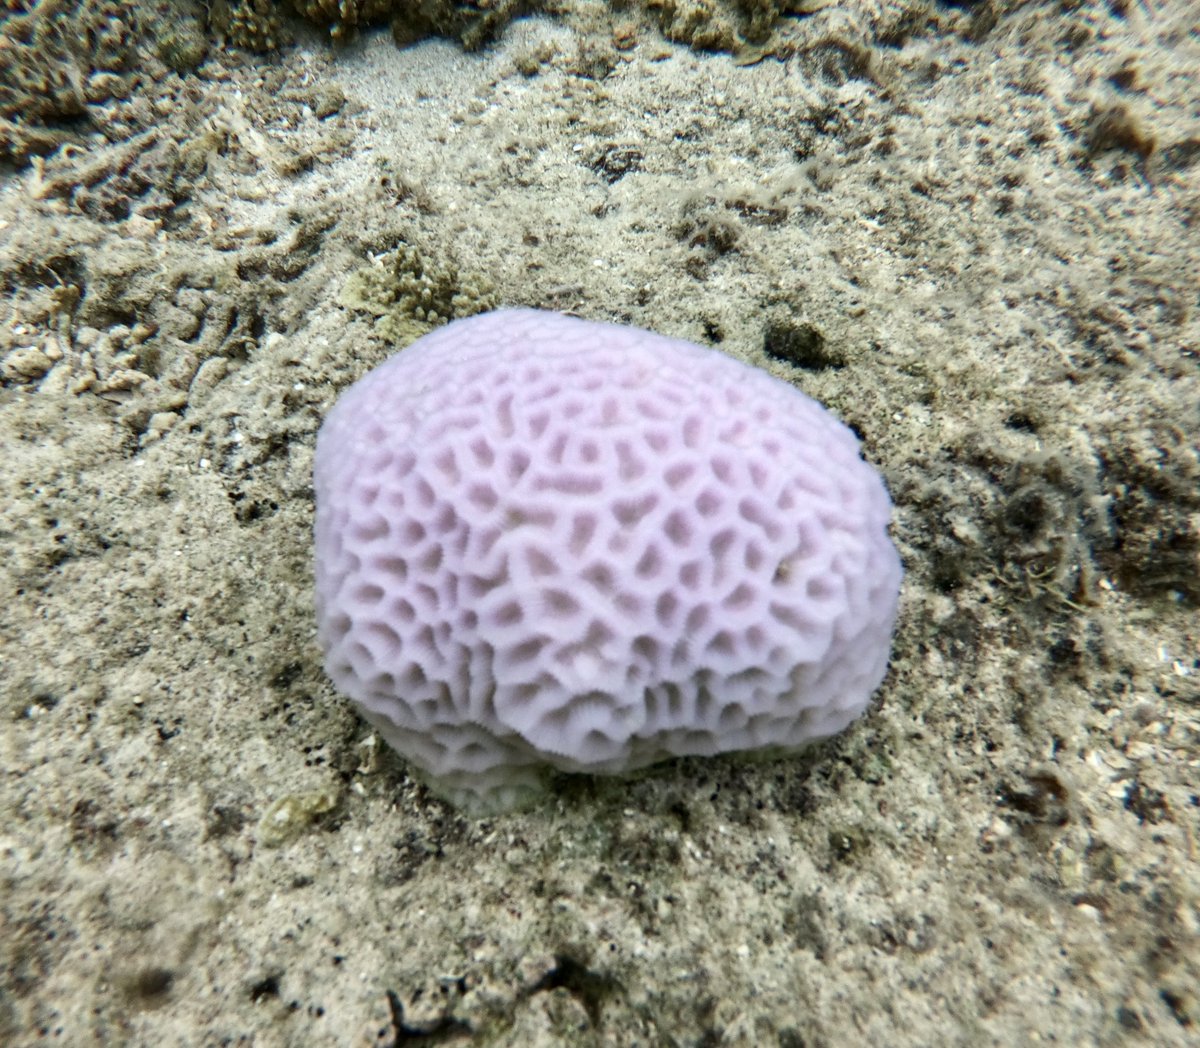 Have you ever seen a coral that looks like a brain? 🧠 It’s called, as you could have guessed, “brain coral”. It’s so smart that it knows how to live for up to 900 years 🤓